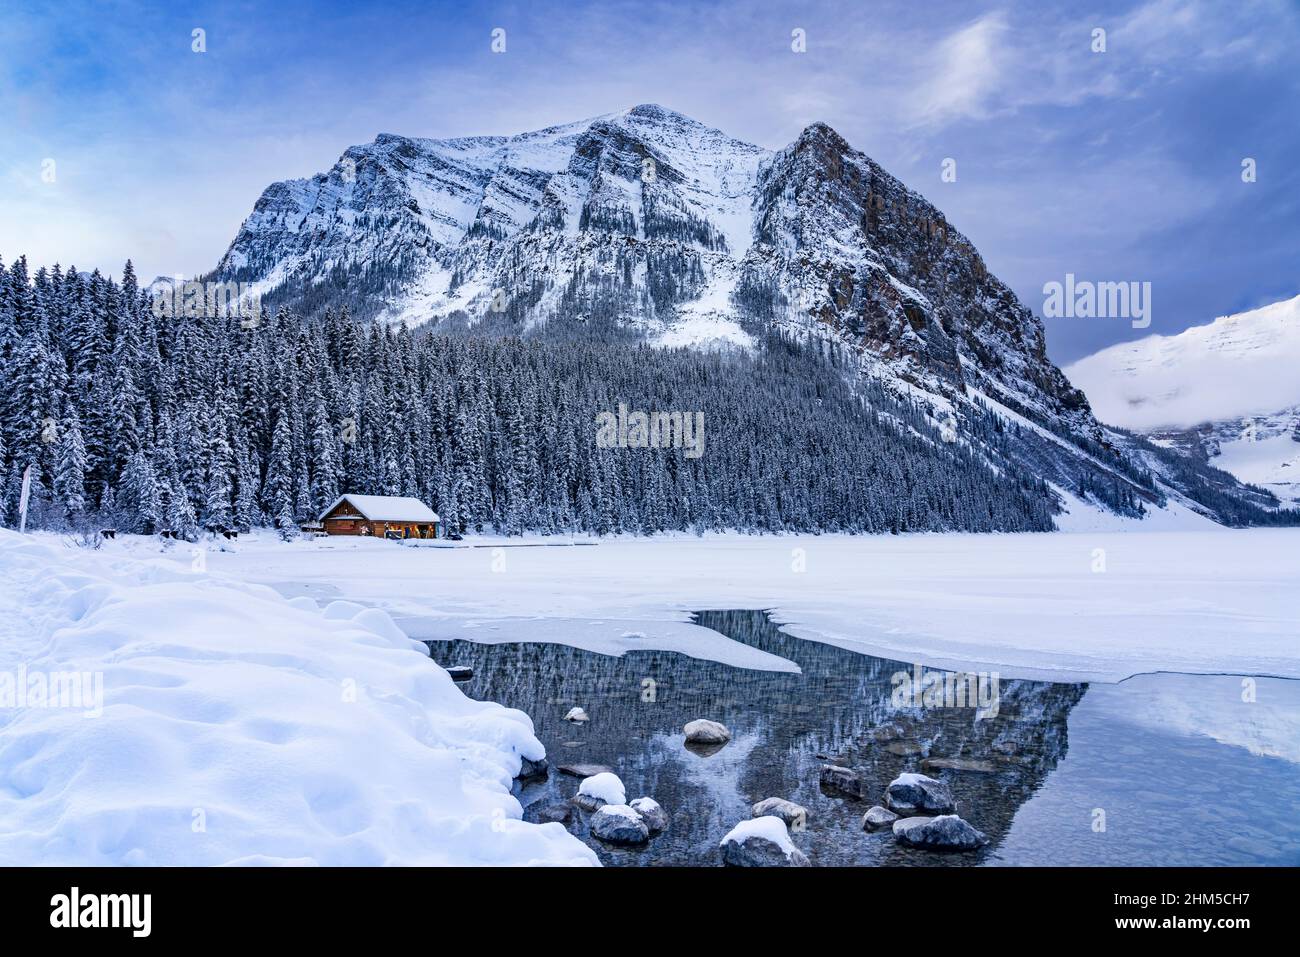 Fairview Mountain and the boathouse in winter at Lake Louise, Banff National Park, Alberta, Canada. Stock Photo